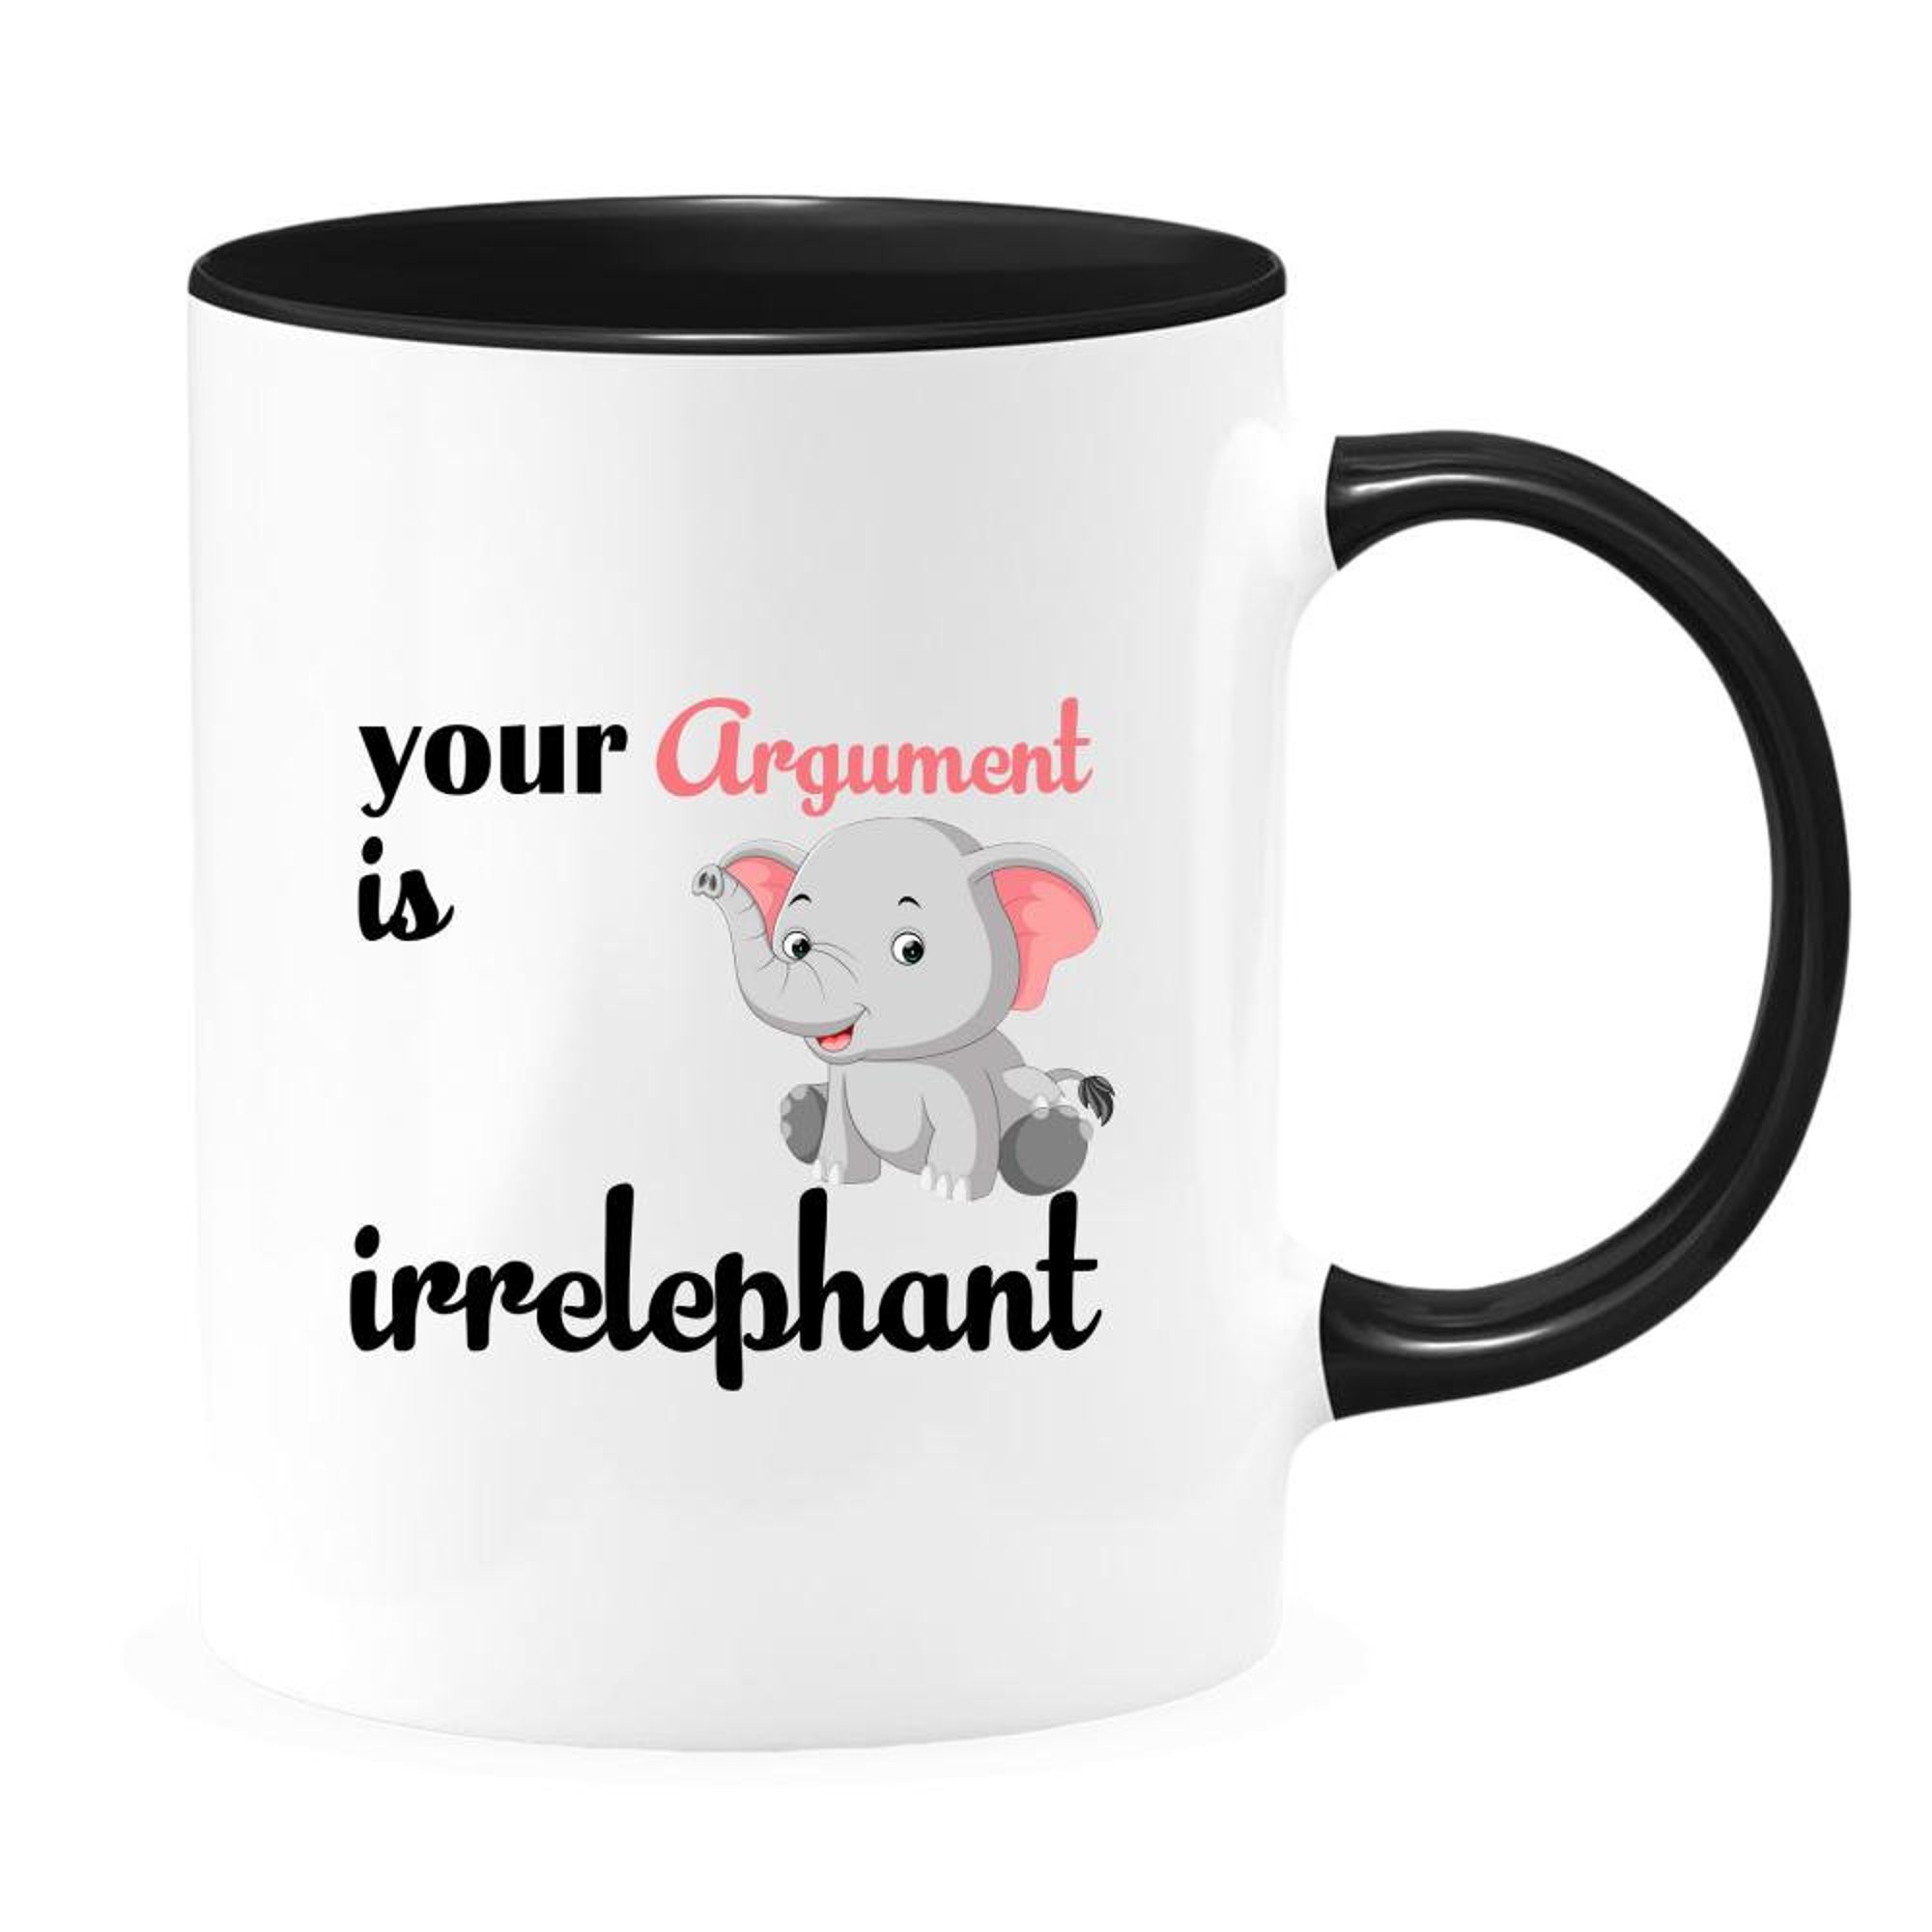 Discover Your Argument is Irrelephant Two-Tone Coffee Mug for Lawyers, Gift for Attorneys